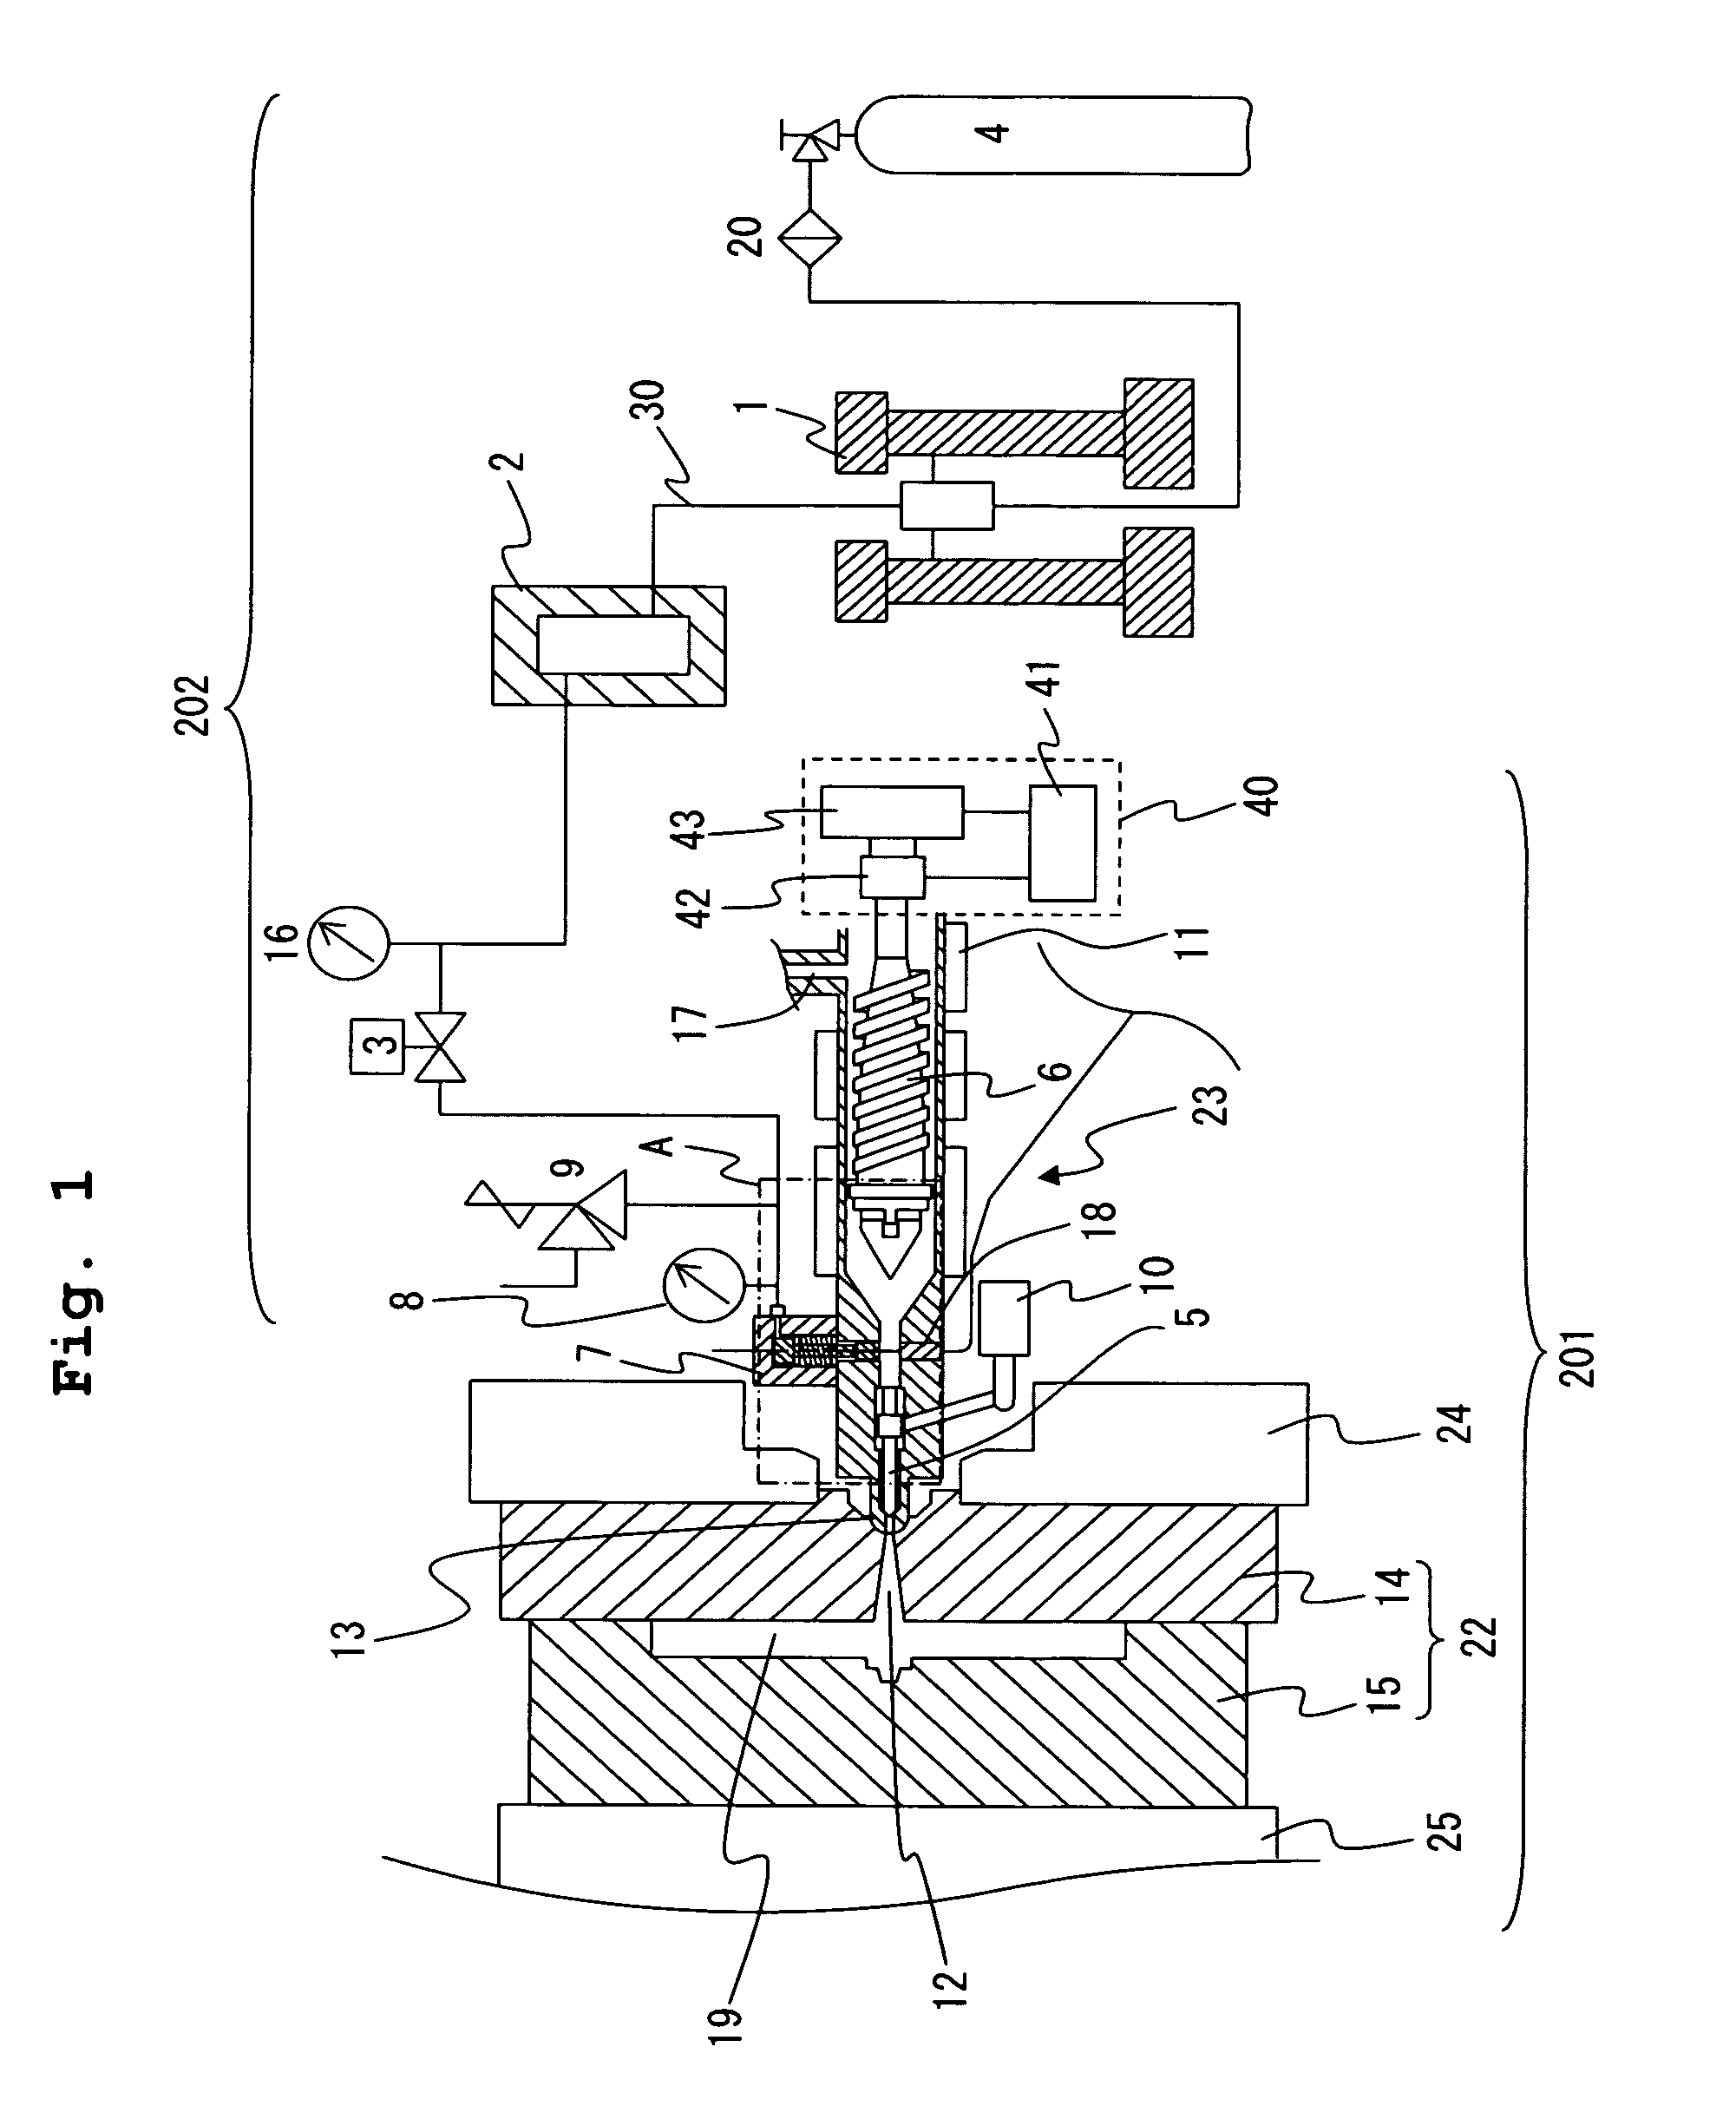 Method of injection molding thermoplastic resin using supercritical fluid and injection molding apparatus